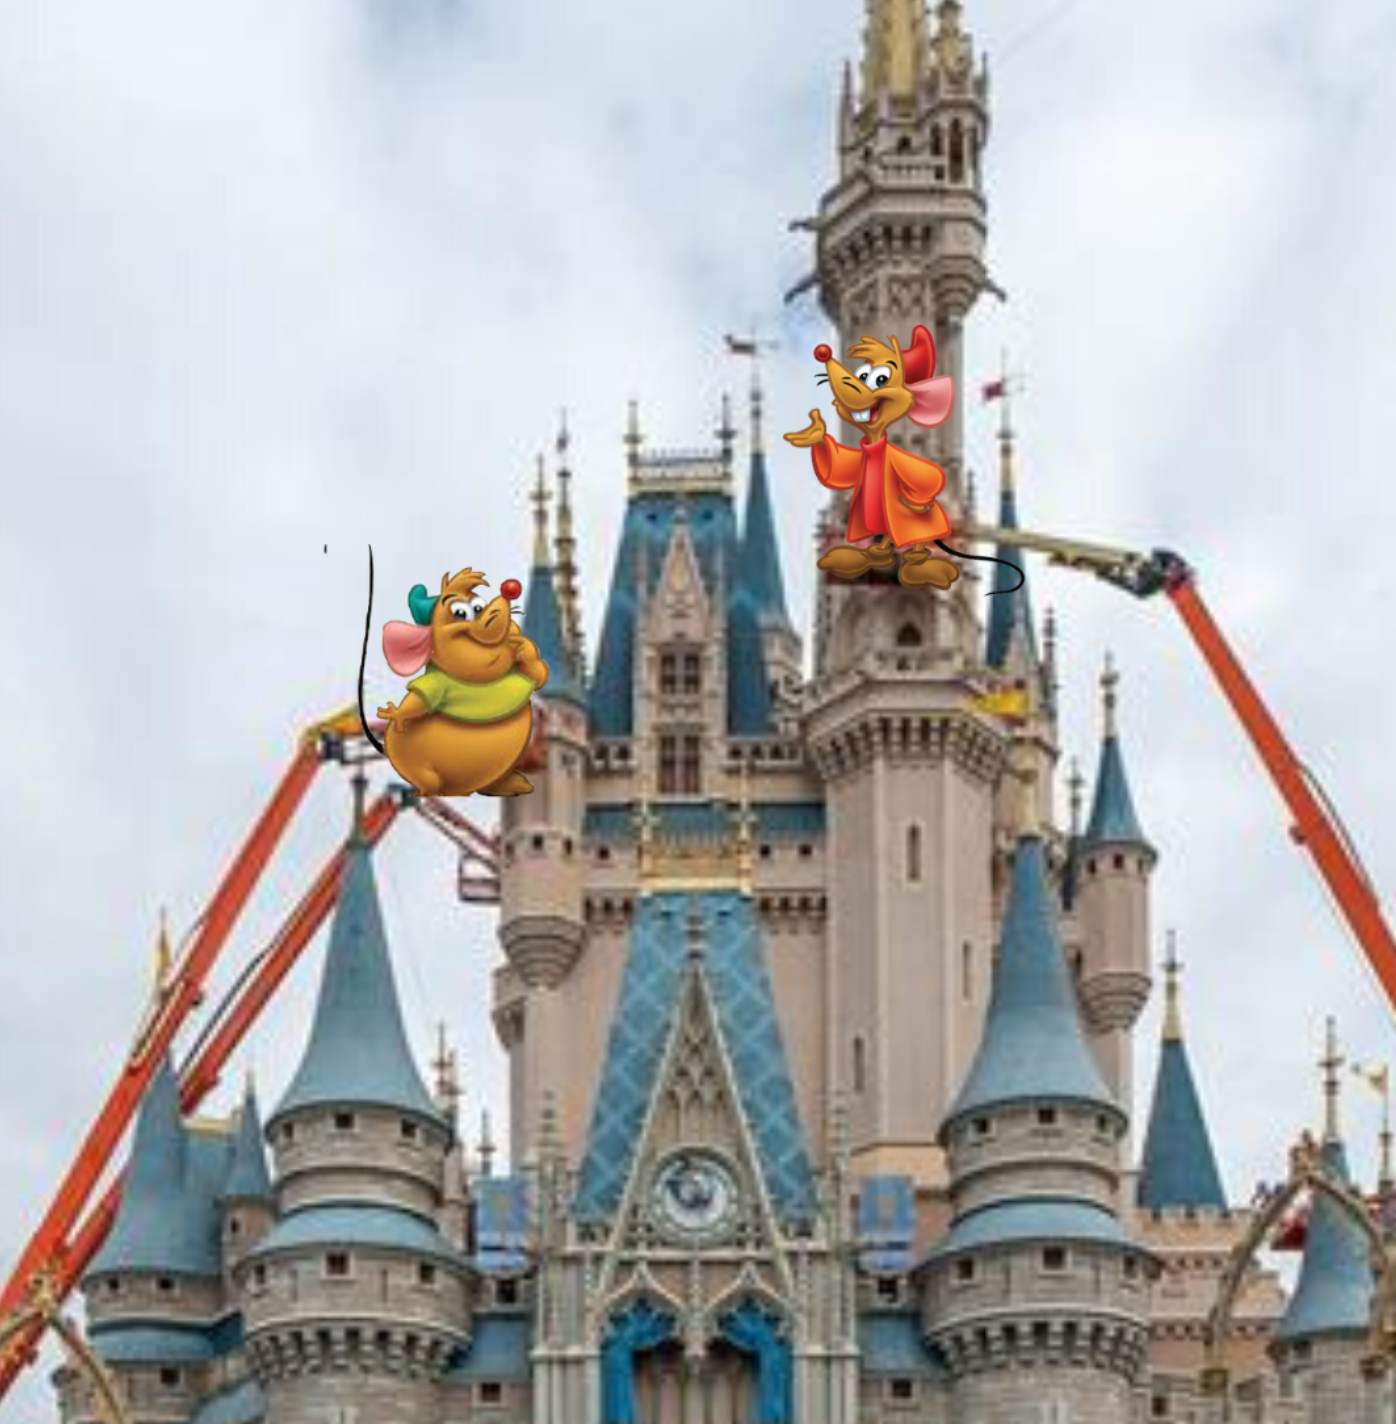 Cinderella Castle Refurb At Disney World Got You Down See What This Dfb Reader Did To Brighten Our Day The Disney Food Blog